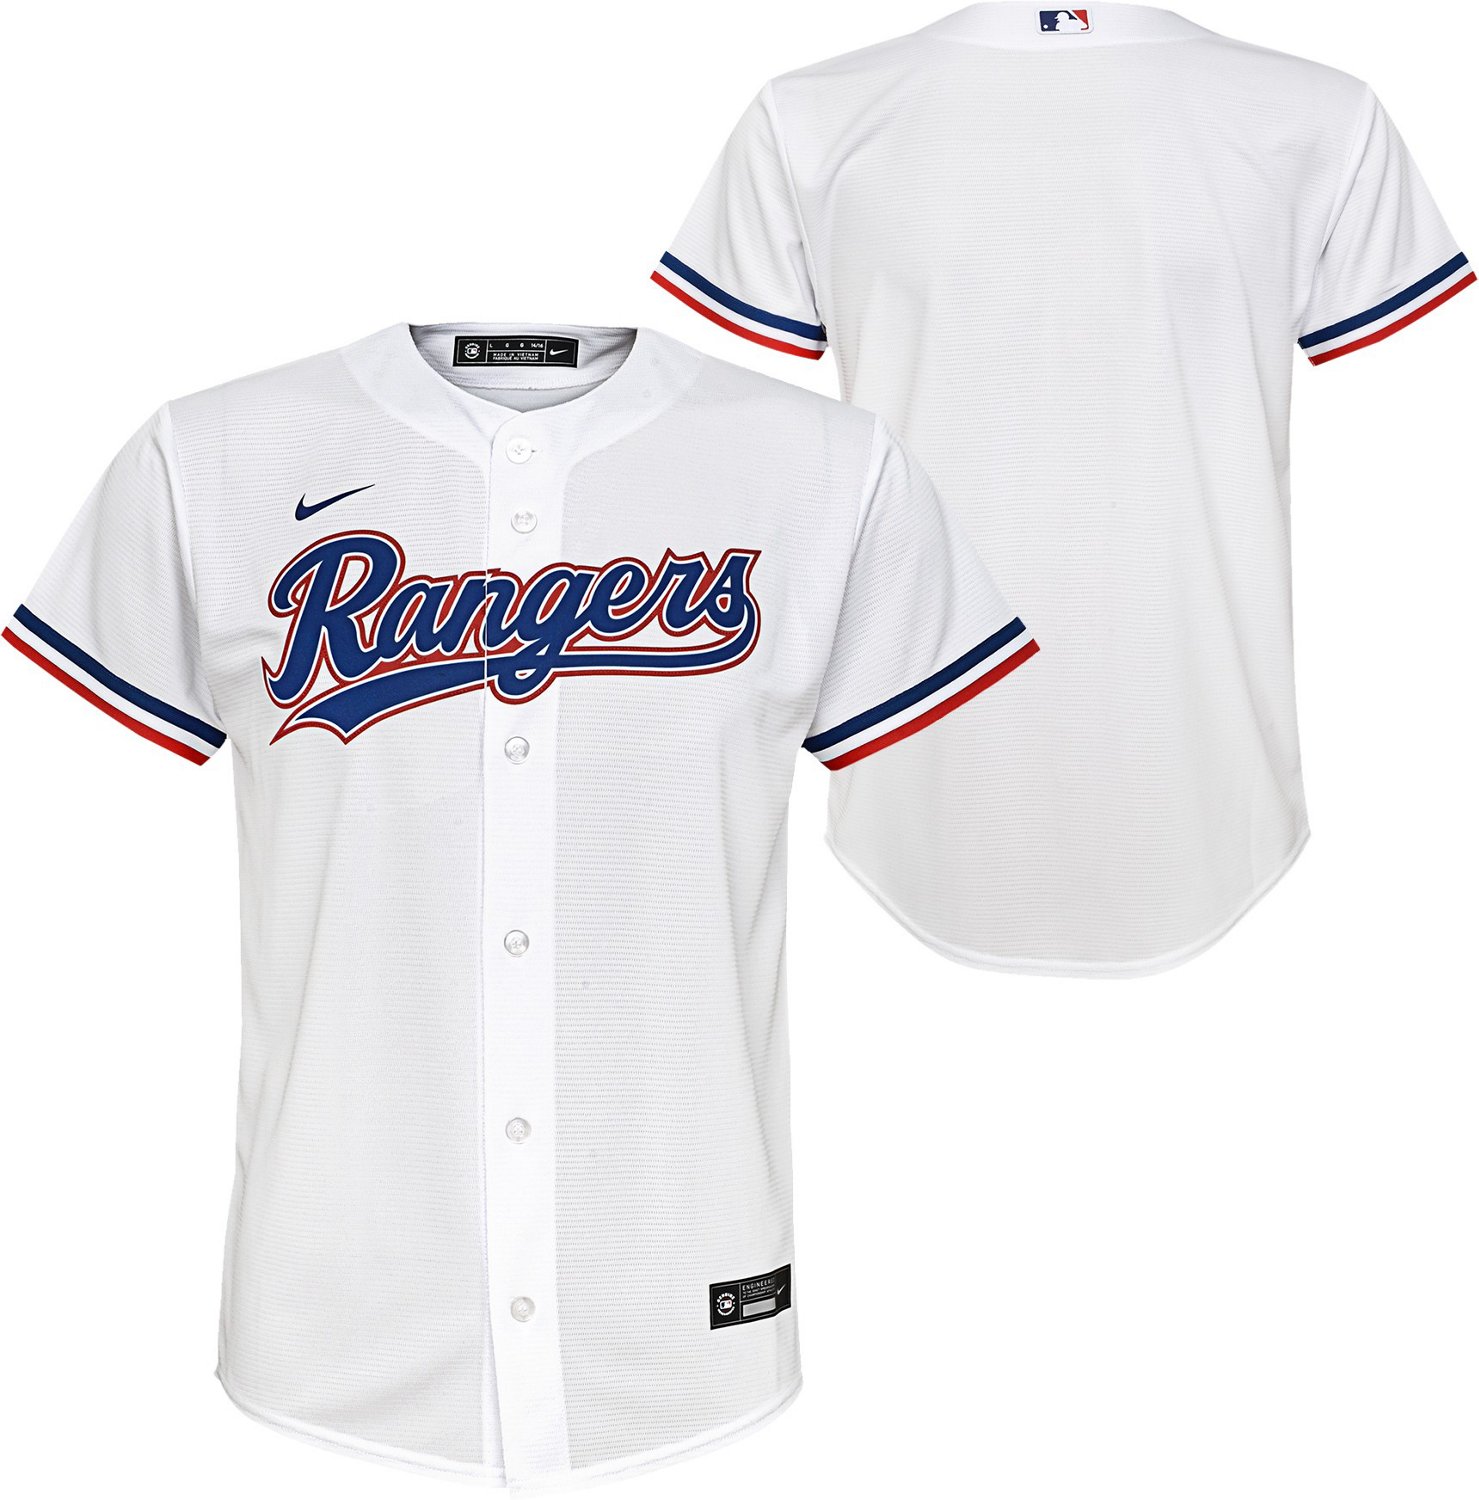 Nike Youth Texas Rangers Home Replica Jersey | Academy